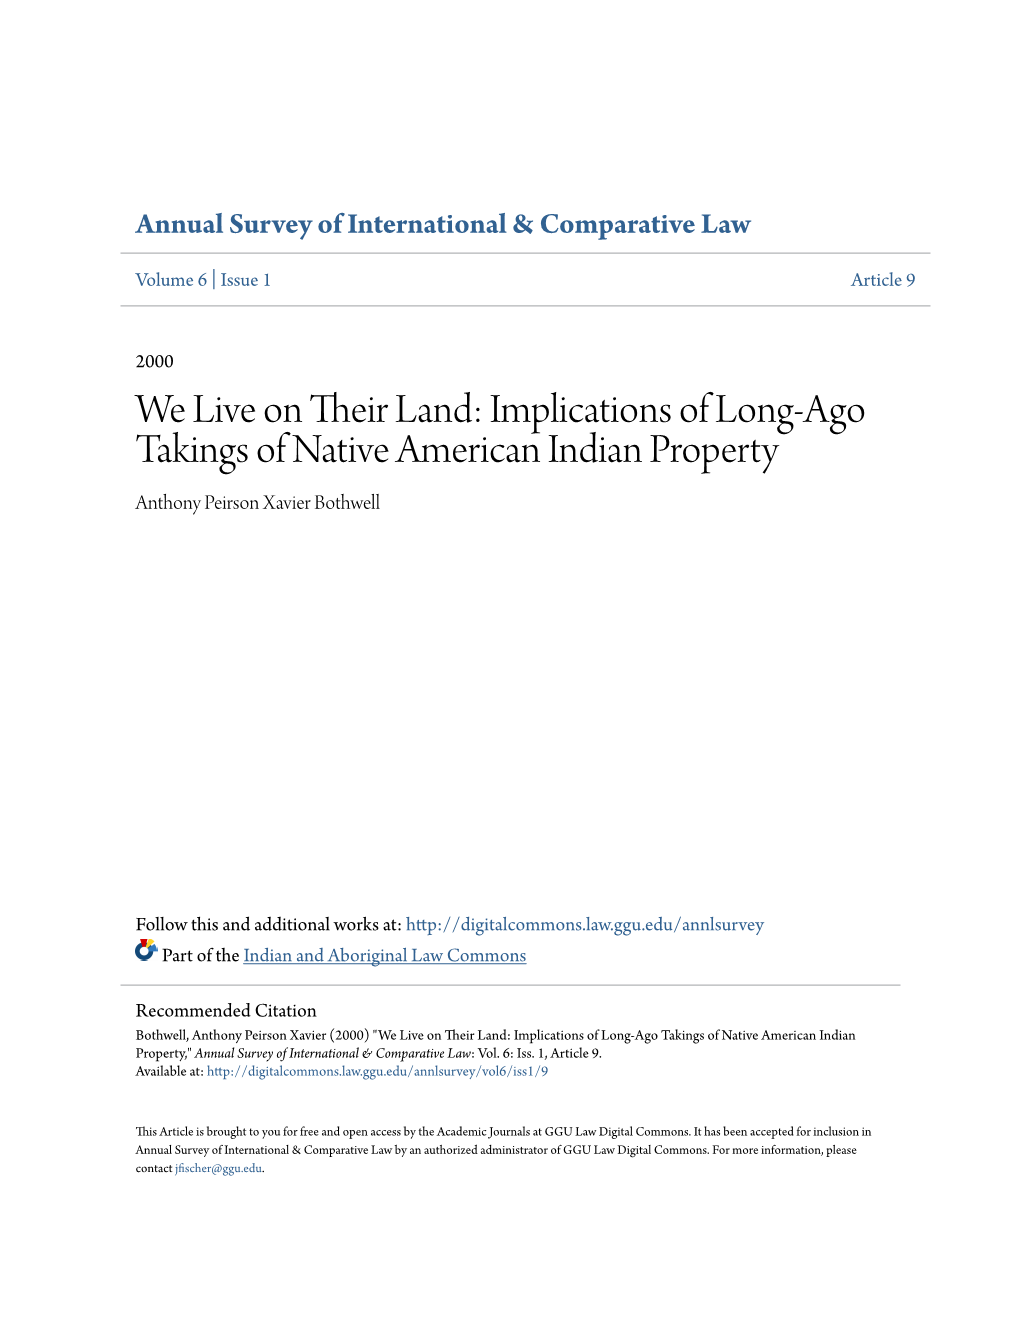 Implications of Long-Ago Takings of Native American Indian Property Anthony Peirson Xavier Bothwell